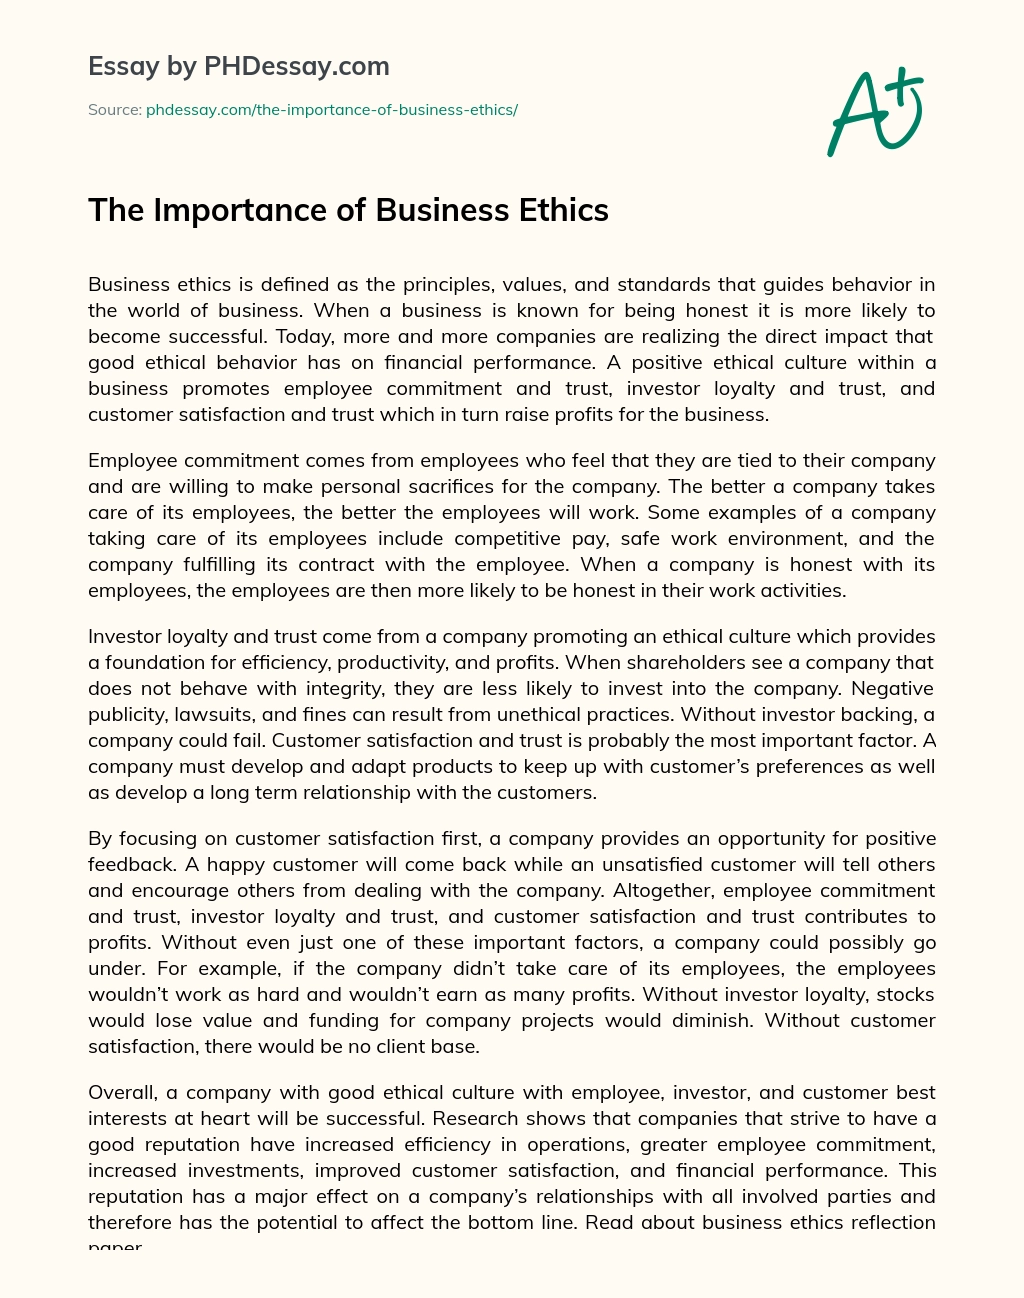 The Importance of Business Ethics essay